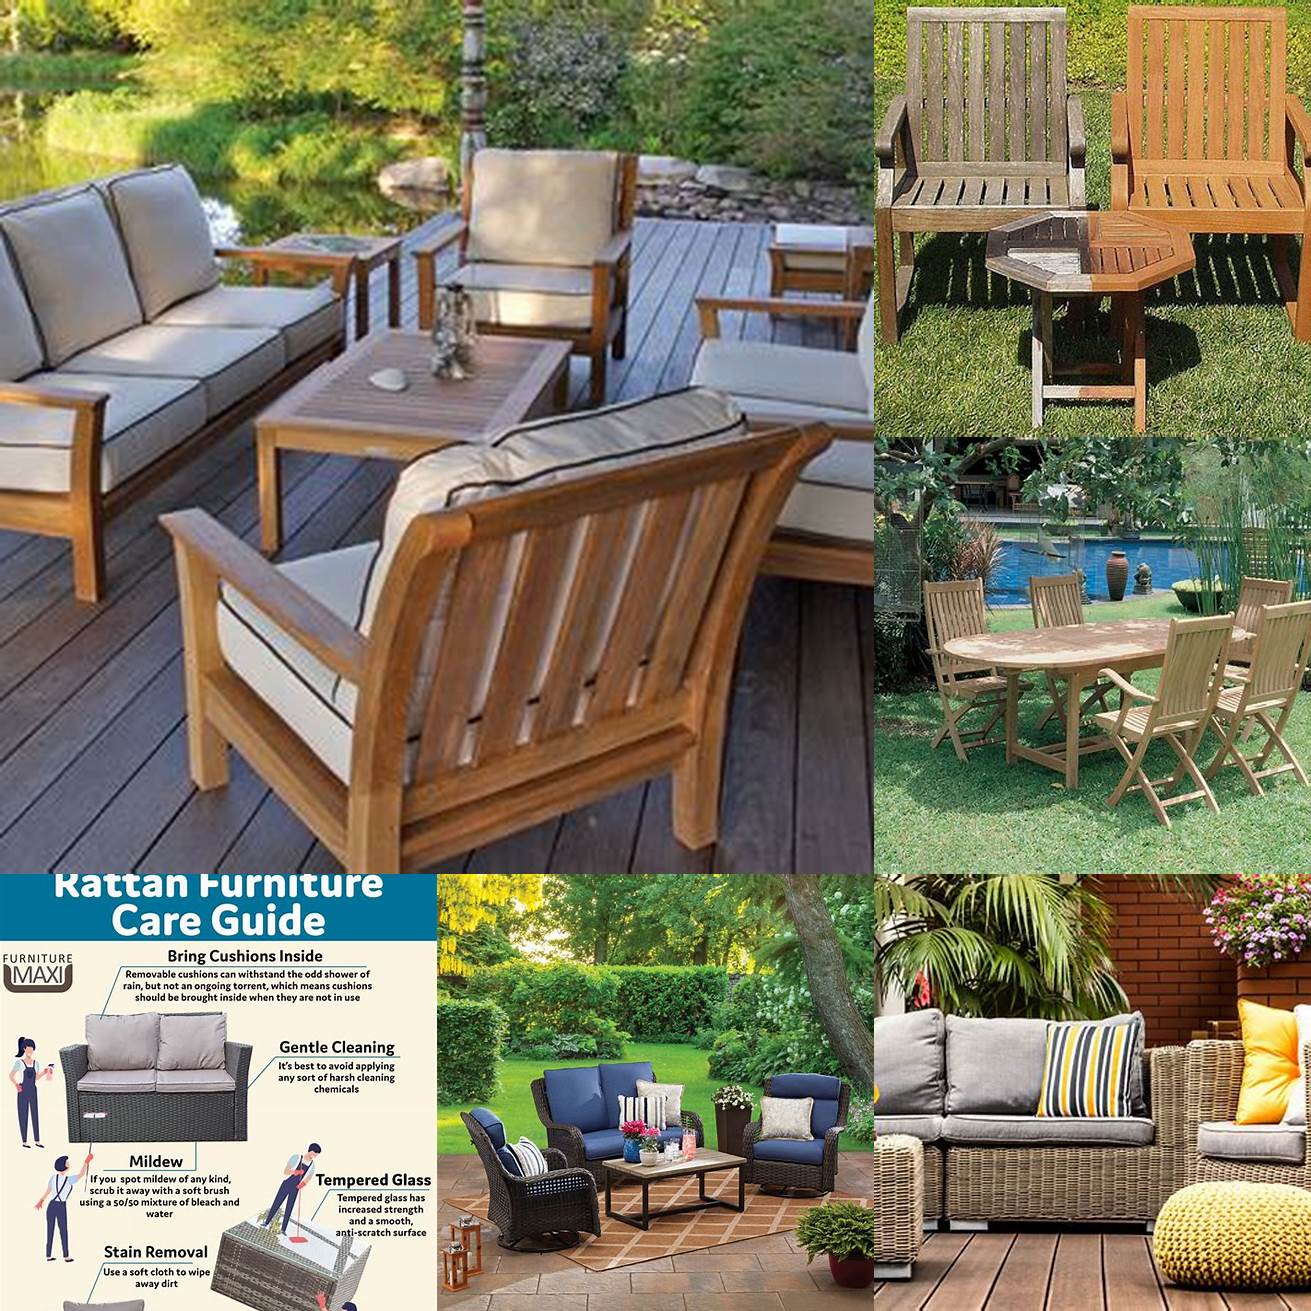 Caring for Outdoor Furniture